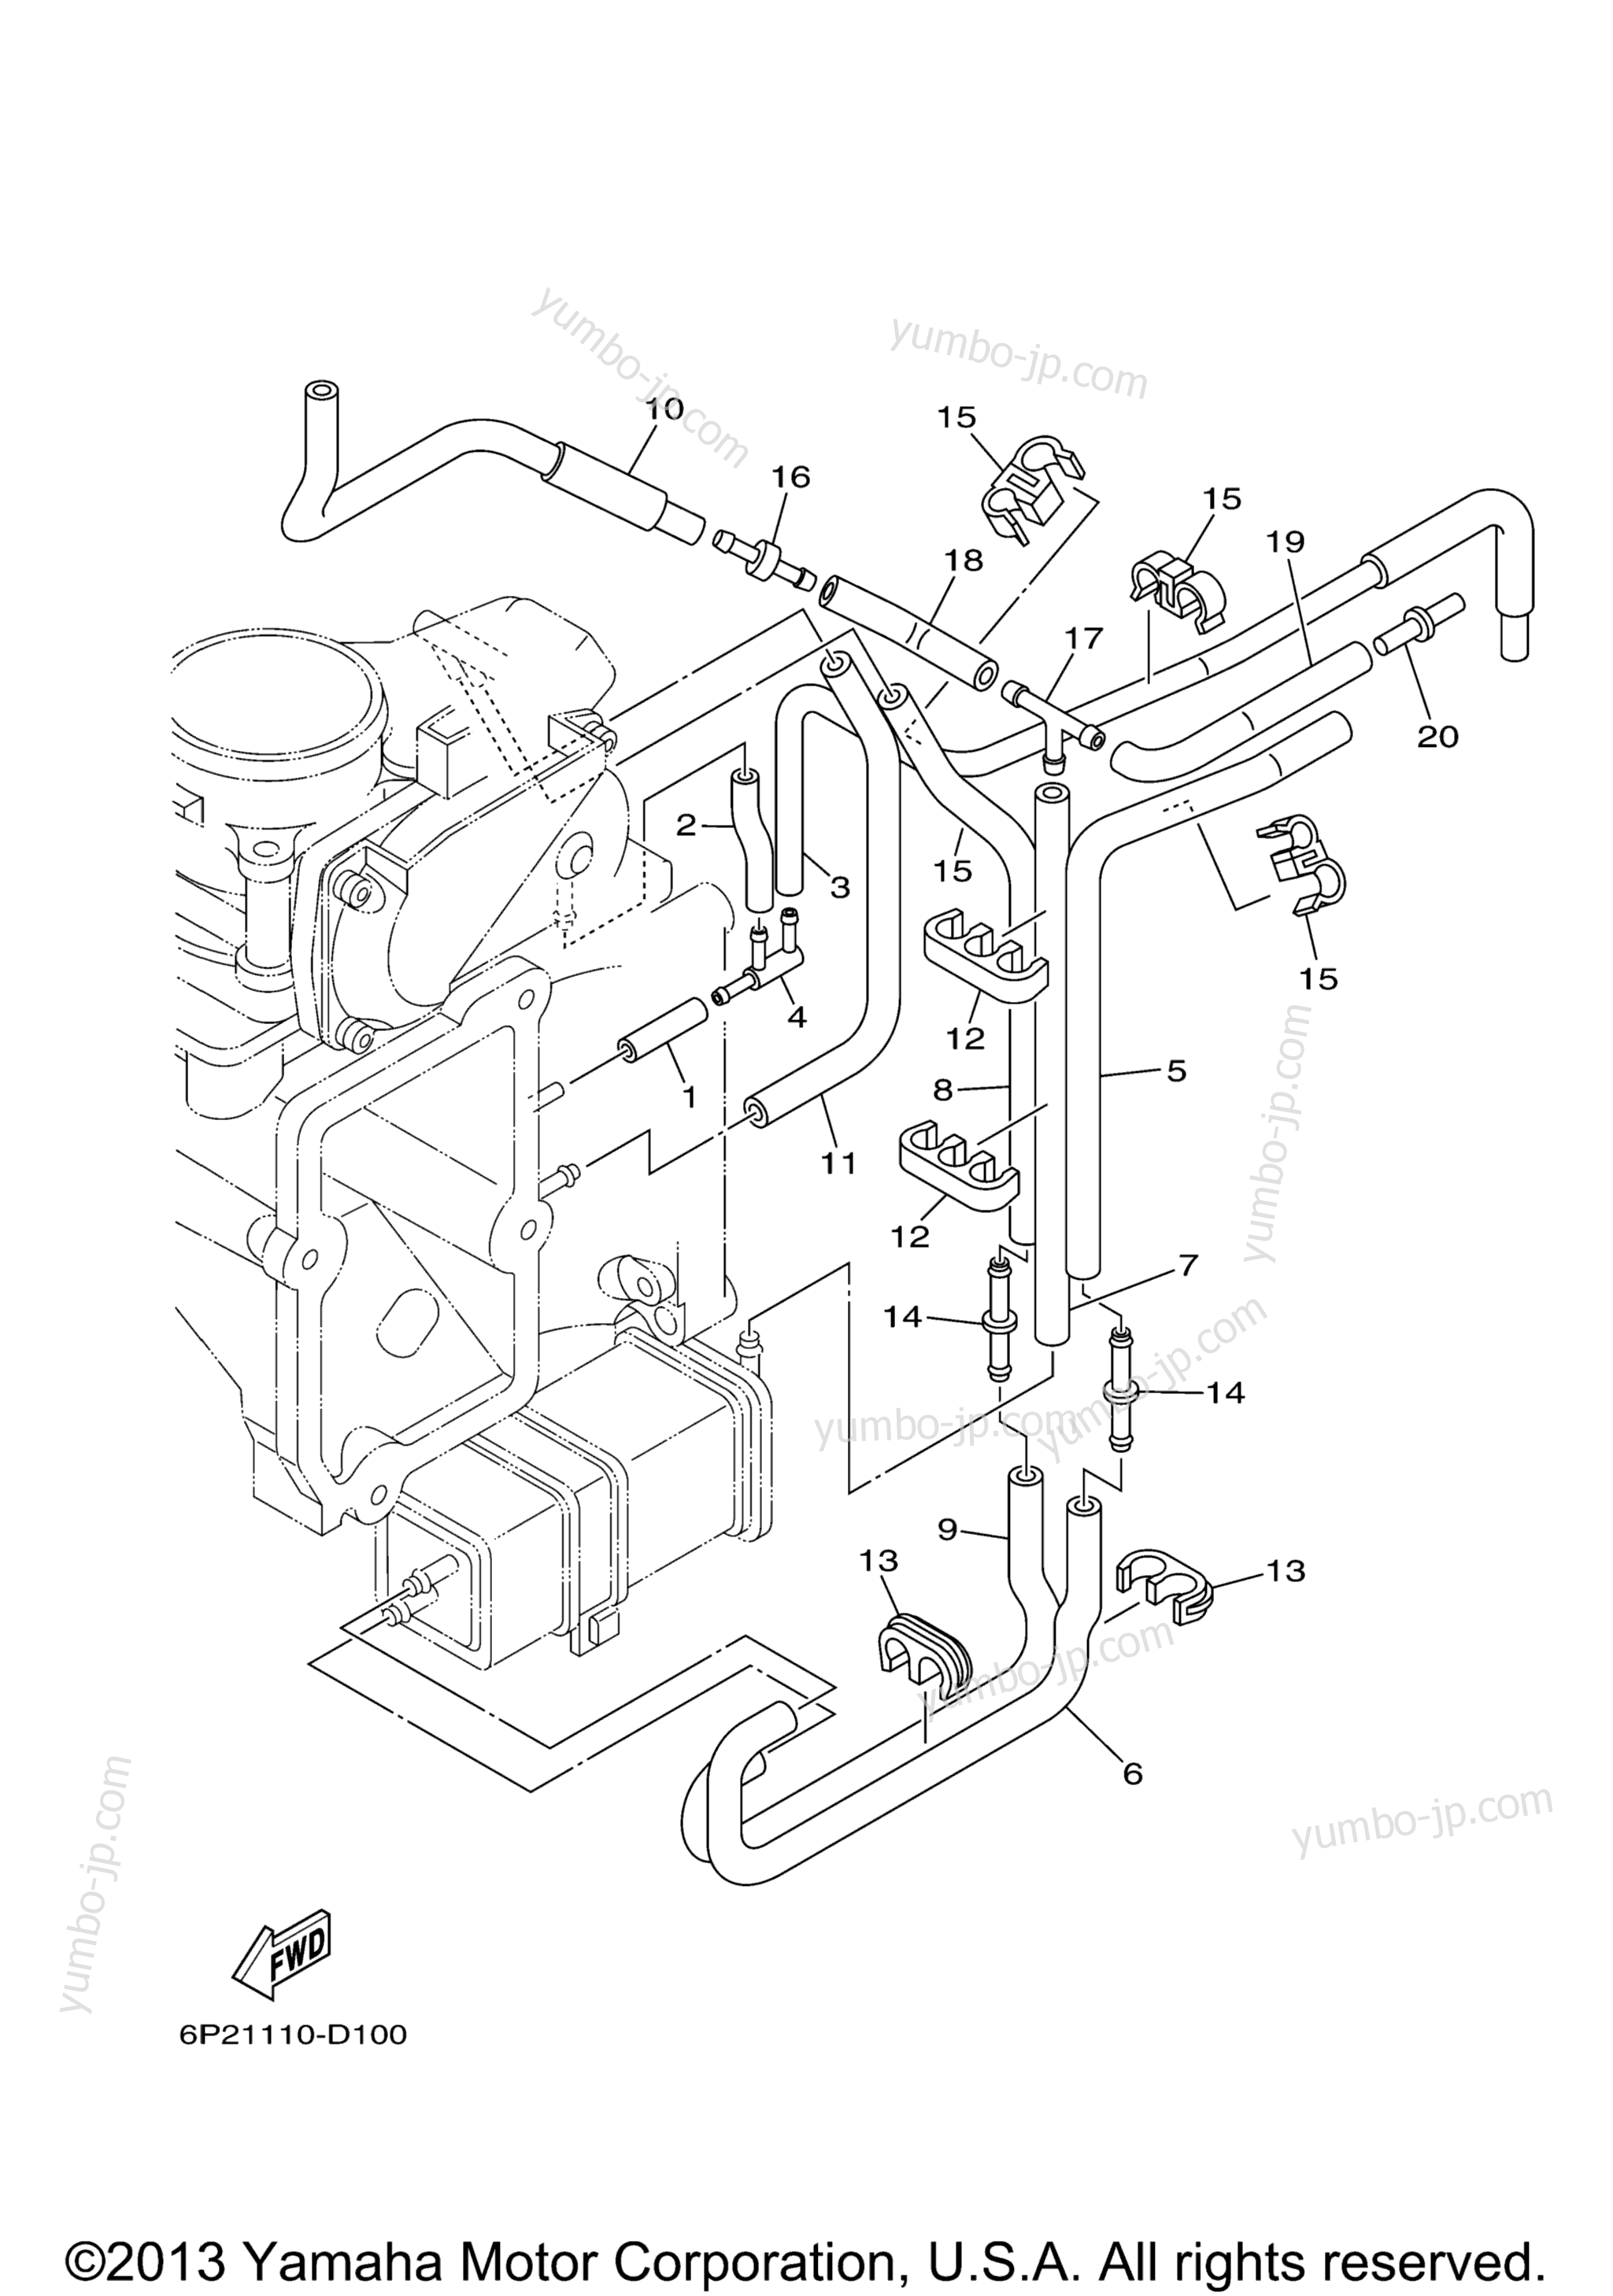 Throttle Body Assy 2 for outboards YAMAHA LF250TUR (0405) 6P2-1002895~1011651 LF250TXR_TUR 6P3-1000957~10054 2006 year